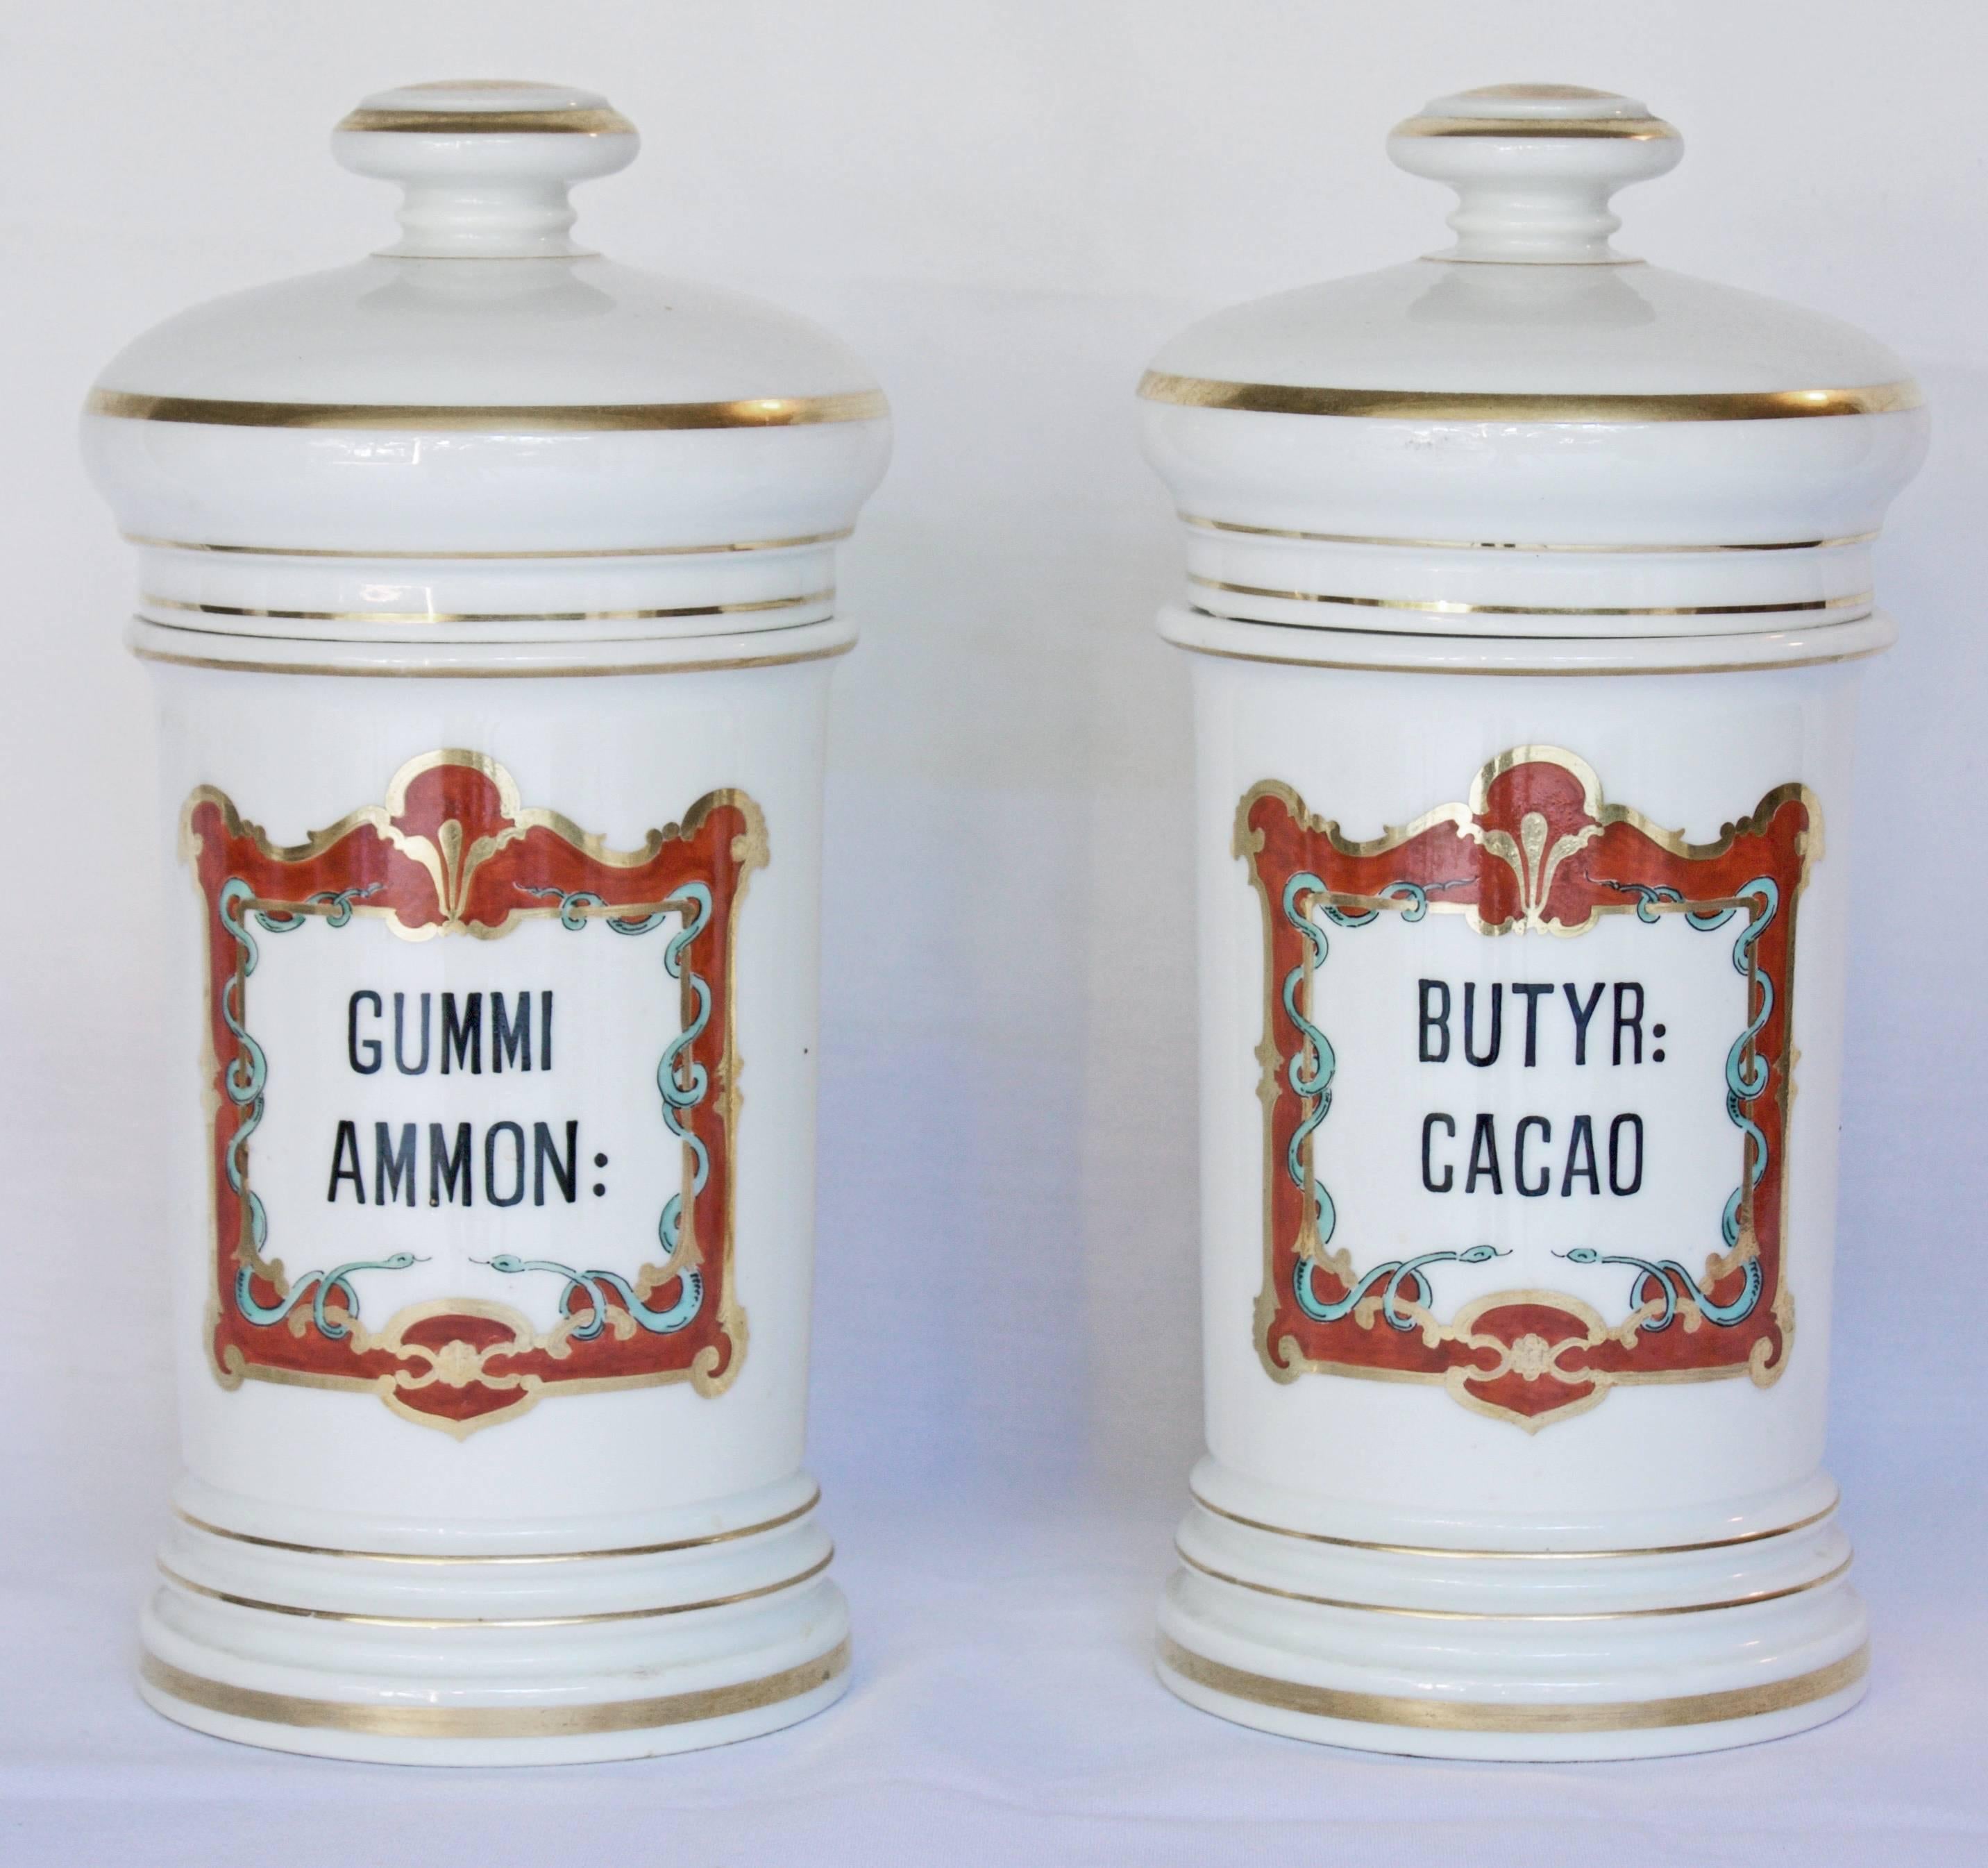 Handsome pair of white and solid porcelain jars each decorated with an hand-painted black label surrounded by a gorgeous reddish frame adorned with 24-karats gold and two blue snakes figures, the Medecin symbol. Gilded domed lid with a knop finial.